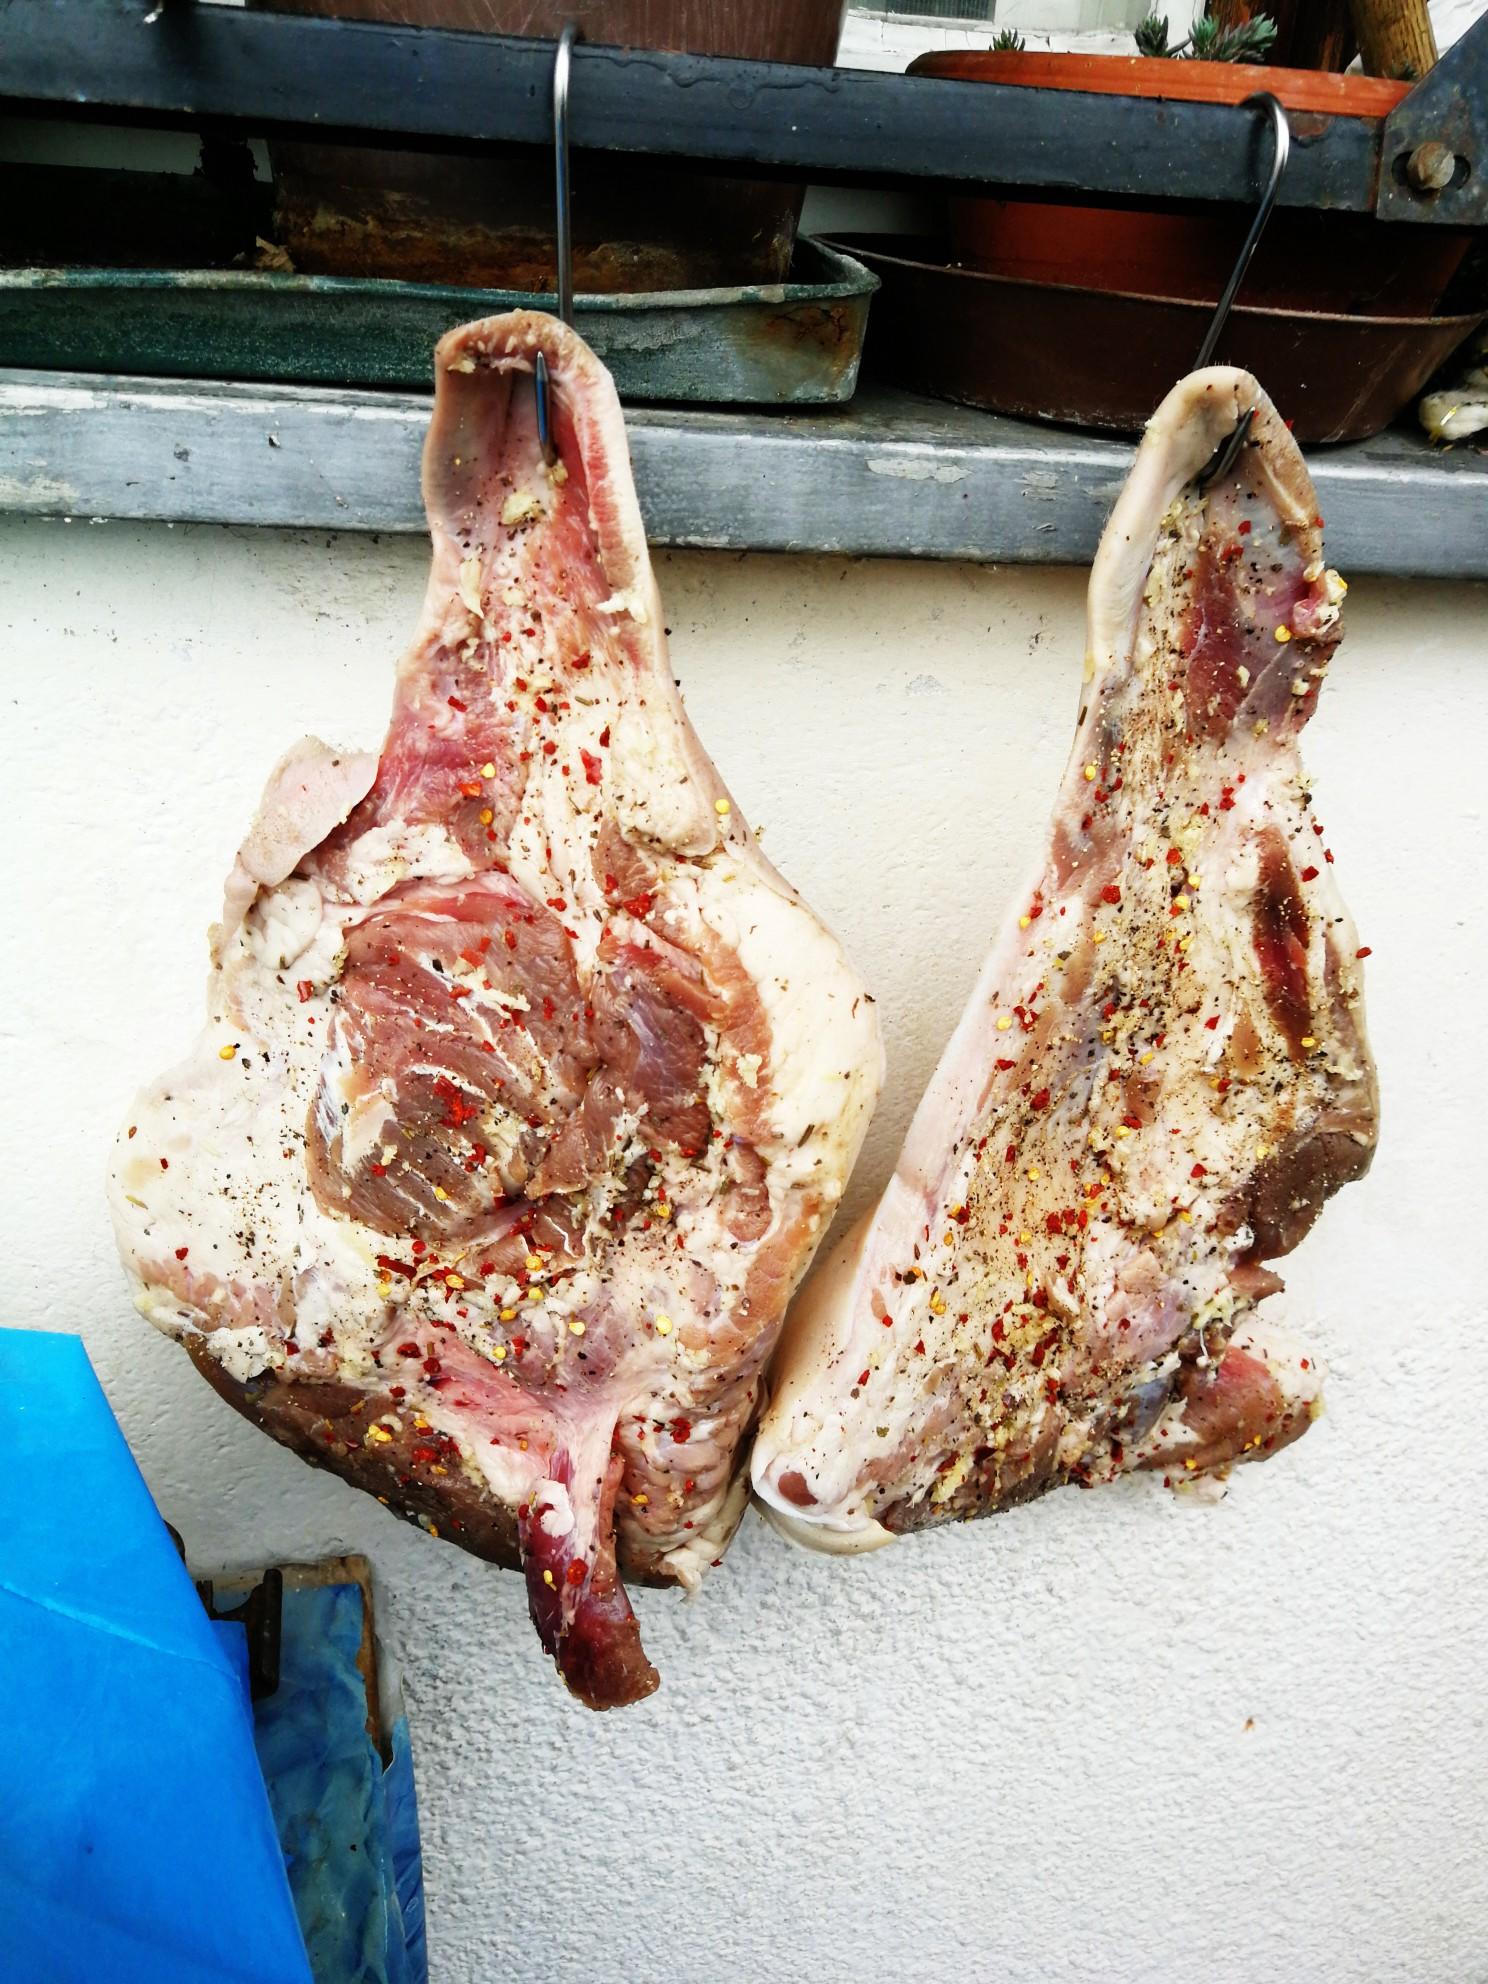 How to Make Guanciale - Curing Guanciale at Home